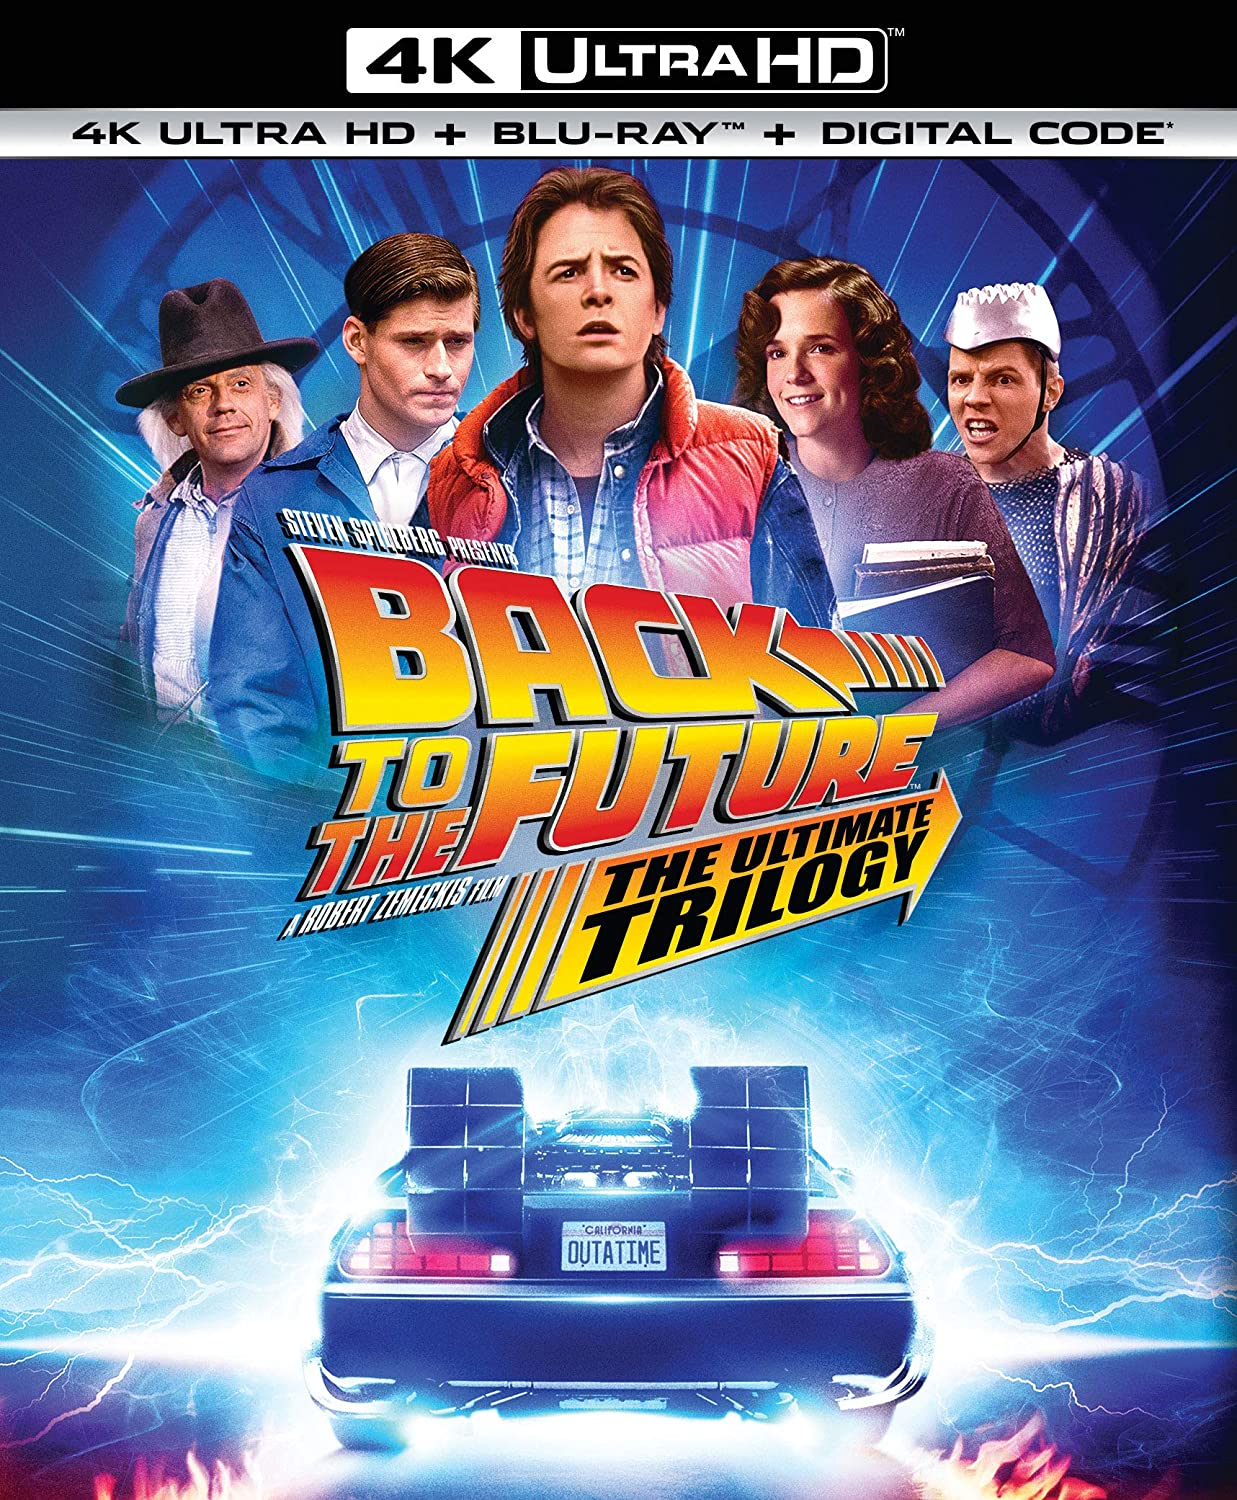 Amazon.com: Back to the Future: The Ultimate Trilogy [4K Ultra HD] $27.19